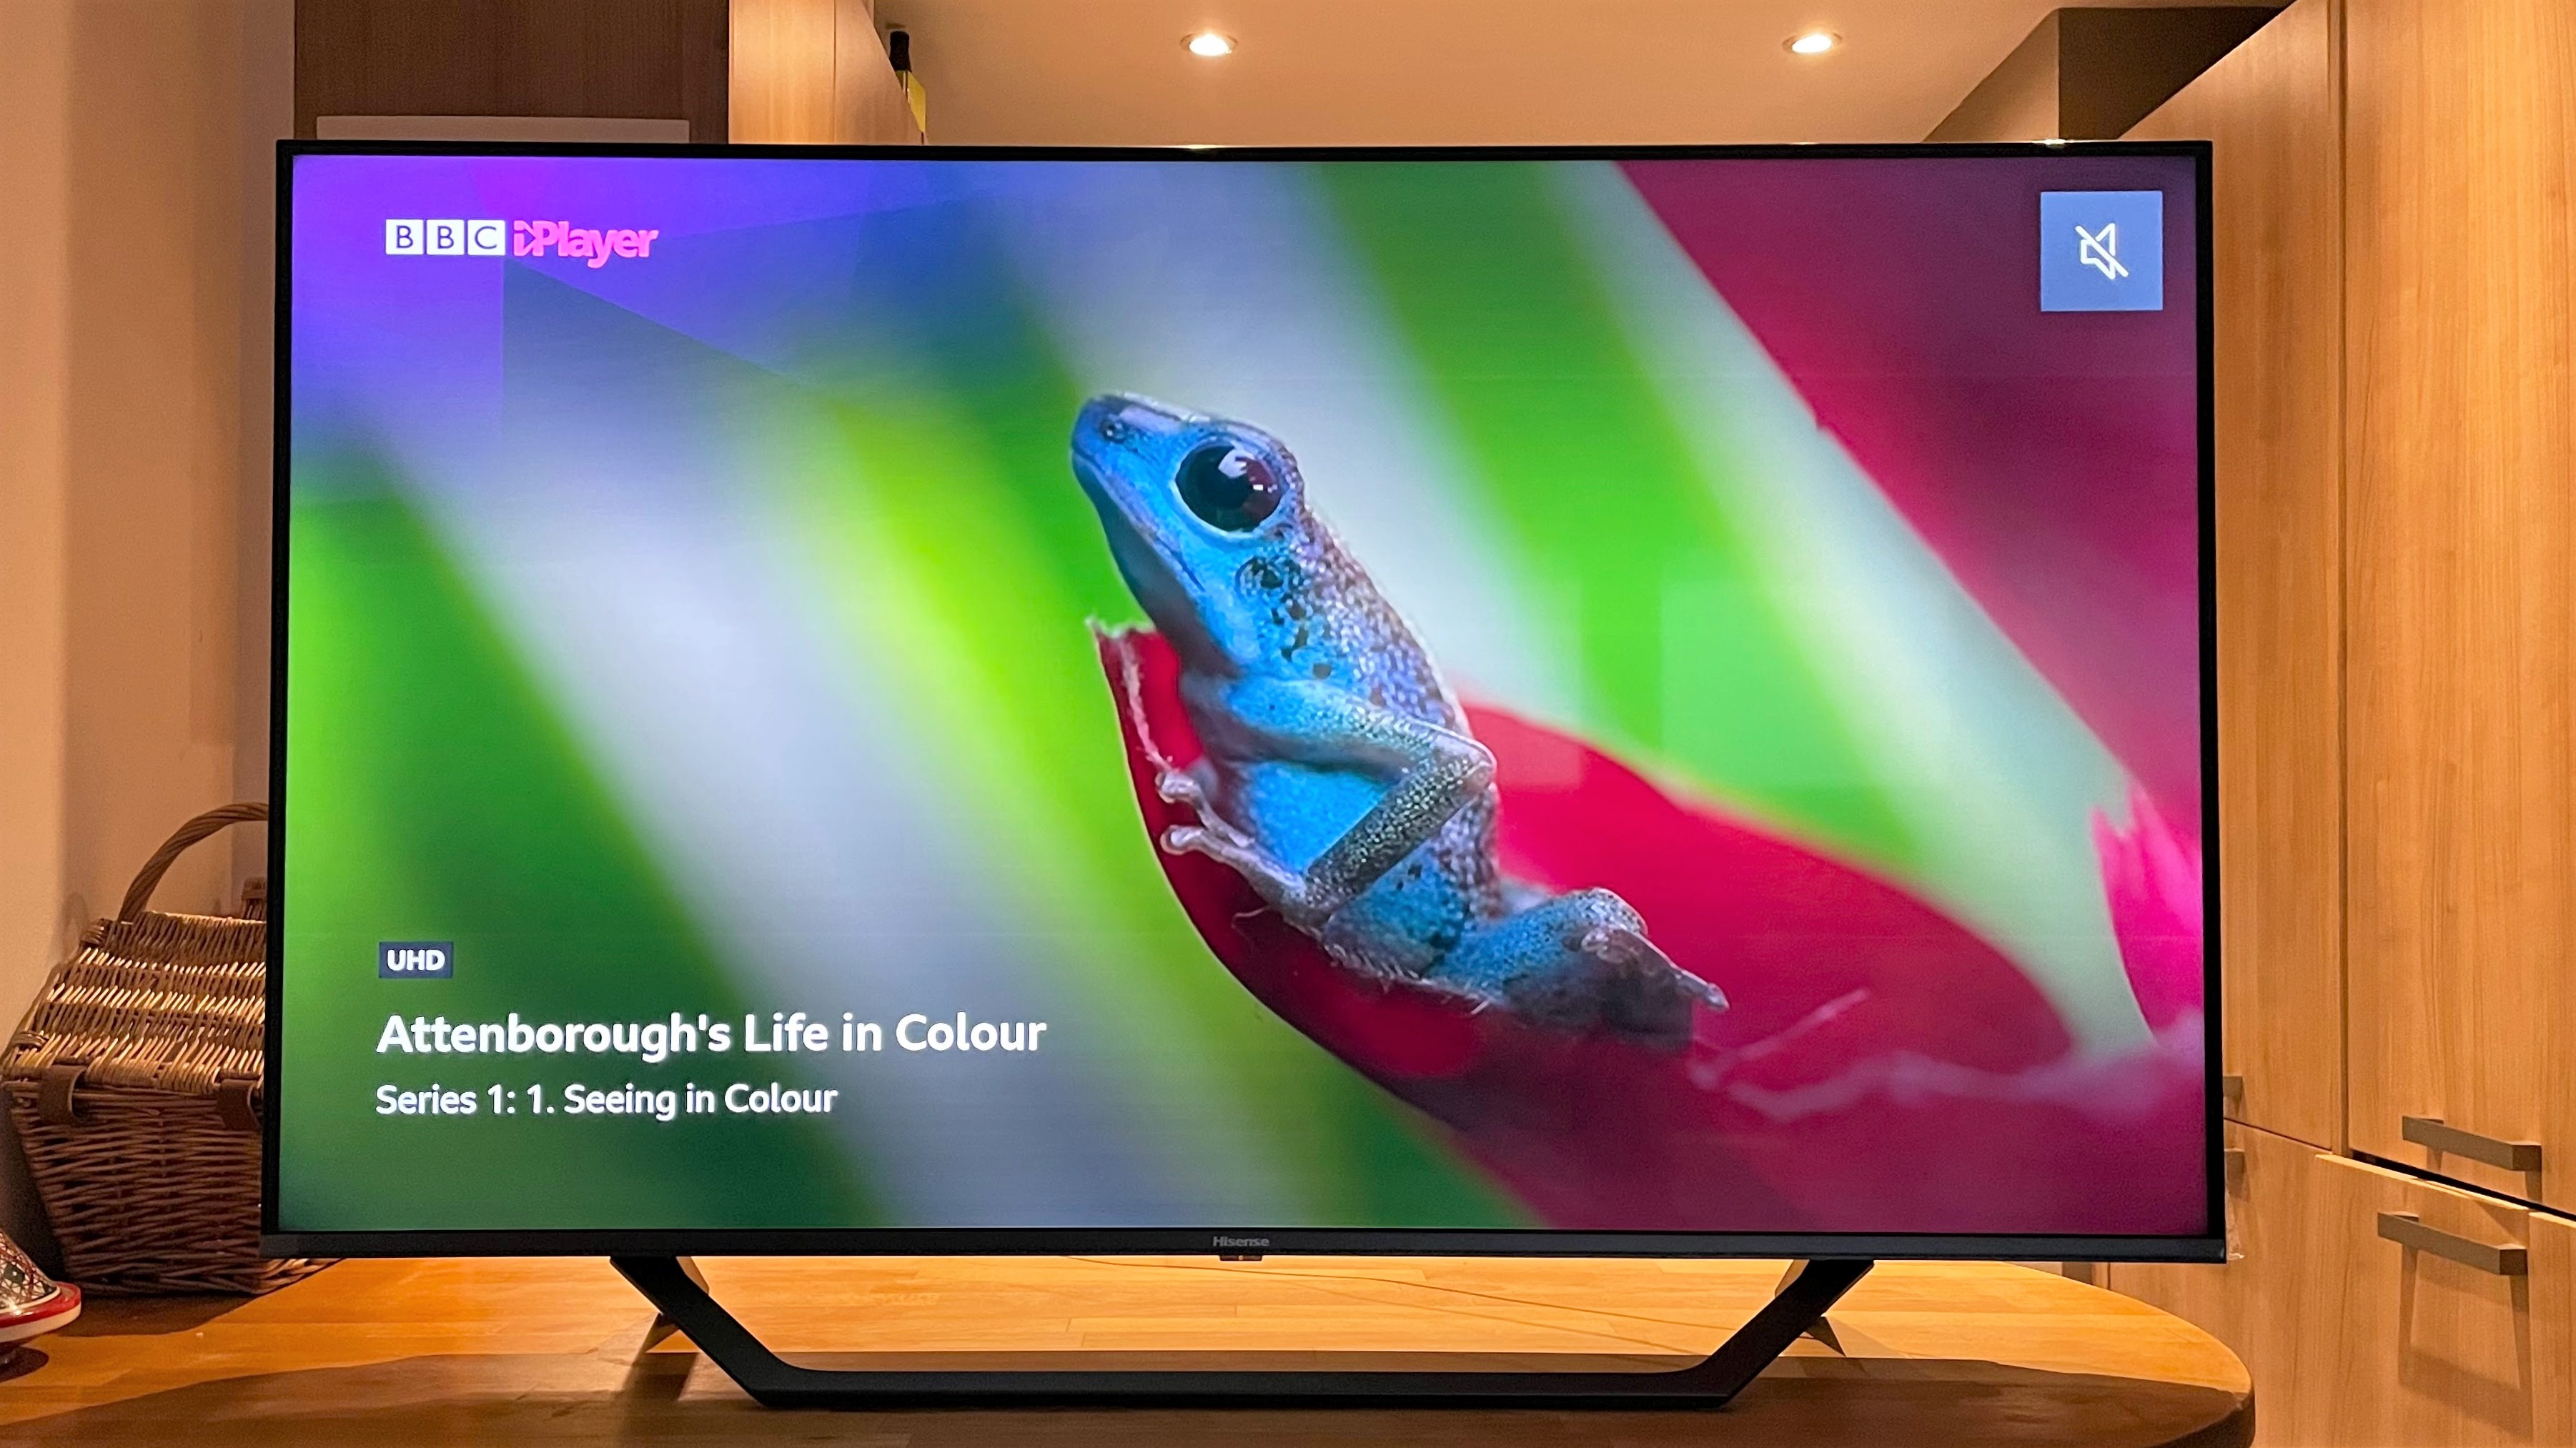 Hisense A7G review: an affordable 50-inch QLED TV